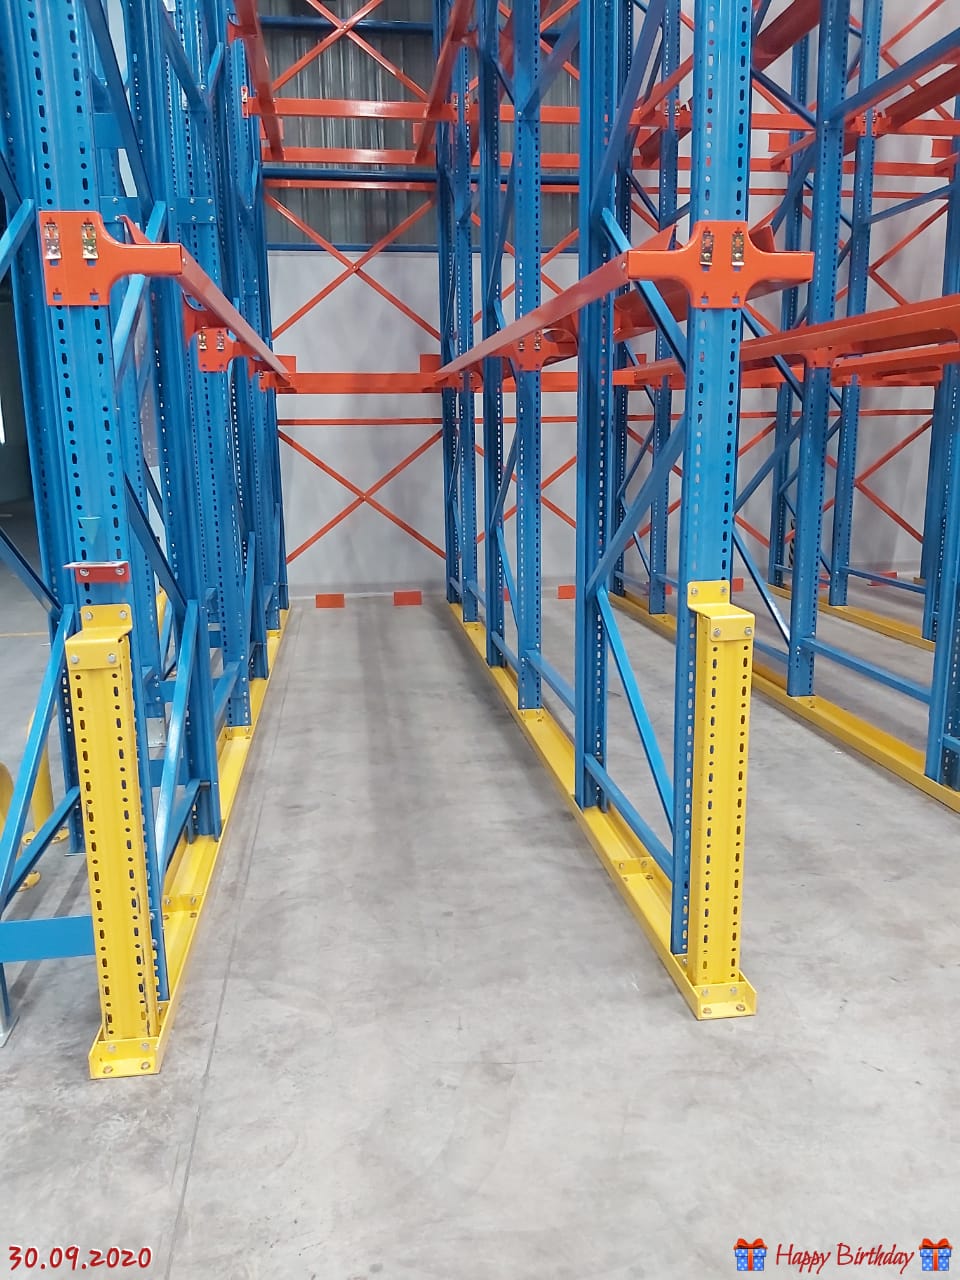 Food No-folding Drive in Style Pallet Racking